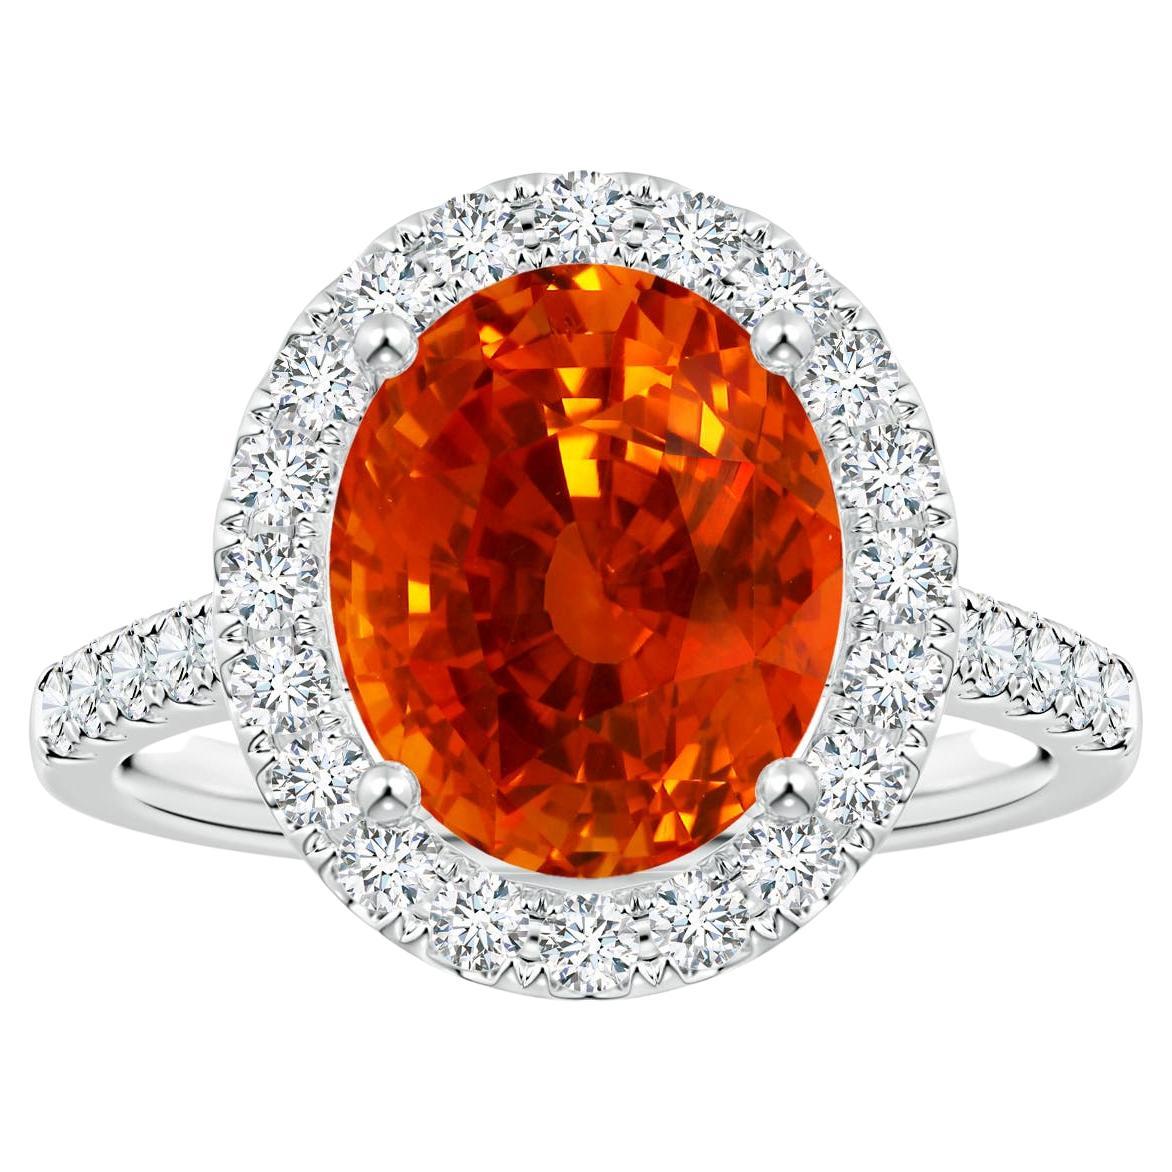 For Sale:  Angara Gia Certified Natural Orange Sapphire Diamond Halo Ring in White Gold